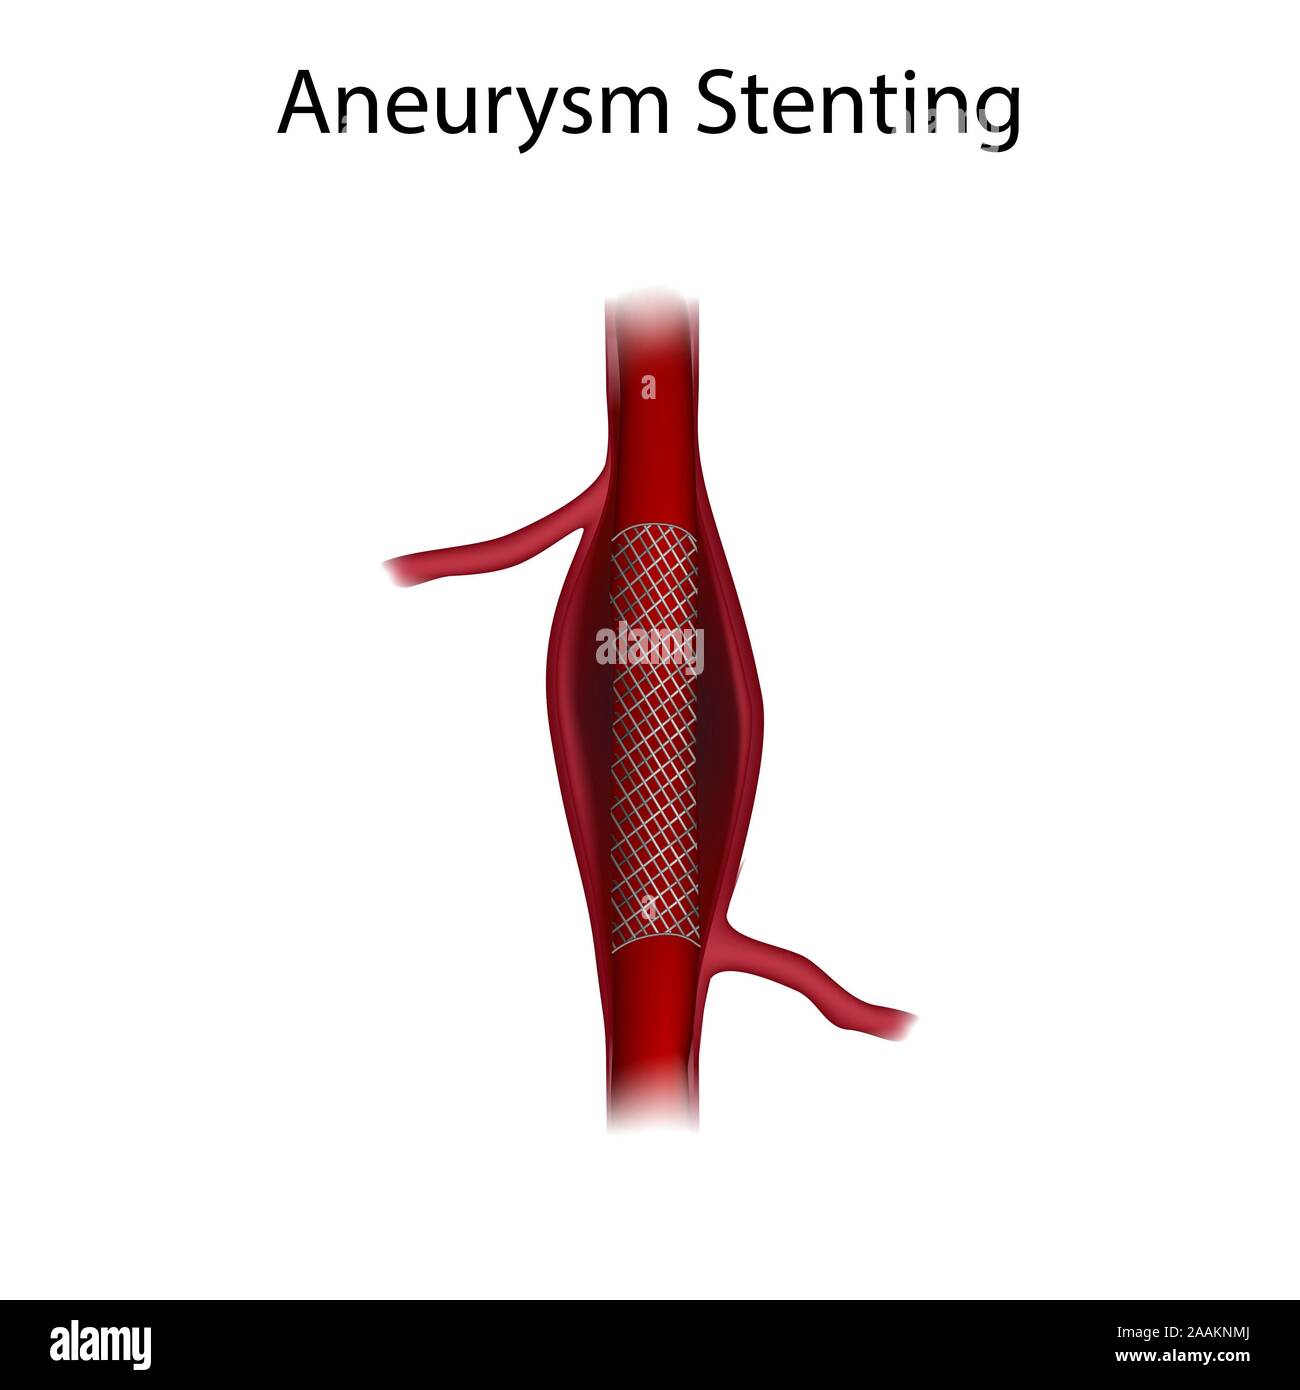 Aneurysm repair with stenting, illustration. Stock Photo